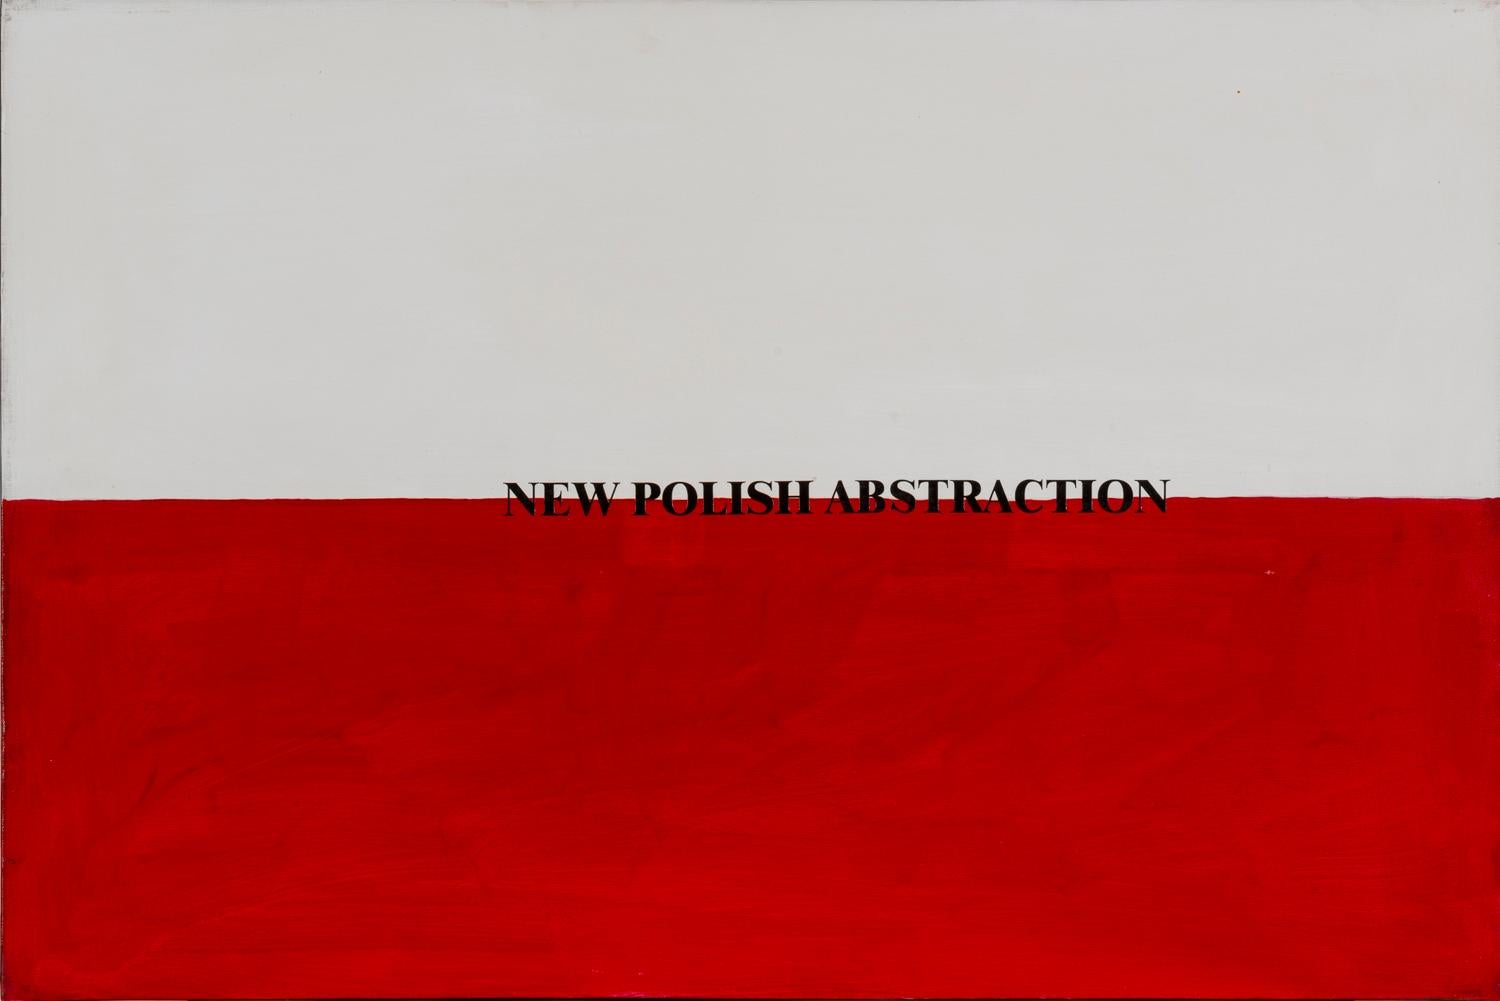 Sarenco Abstract Painting - New Polish Abstraction, 1972-2002, Acrylic on canvas, Flags, Visual Poetry